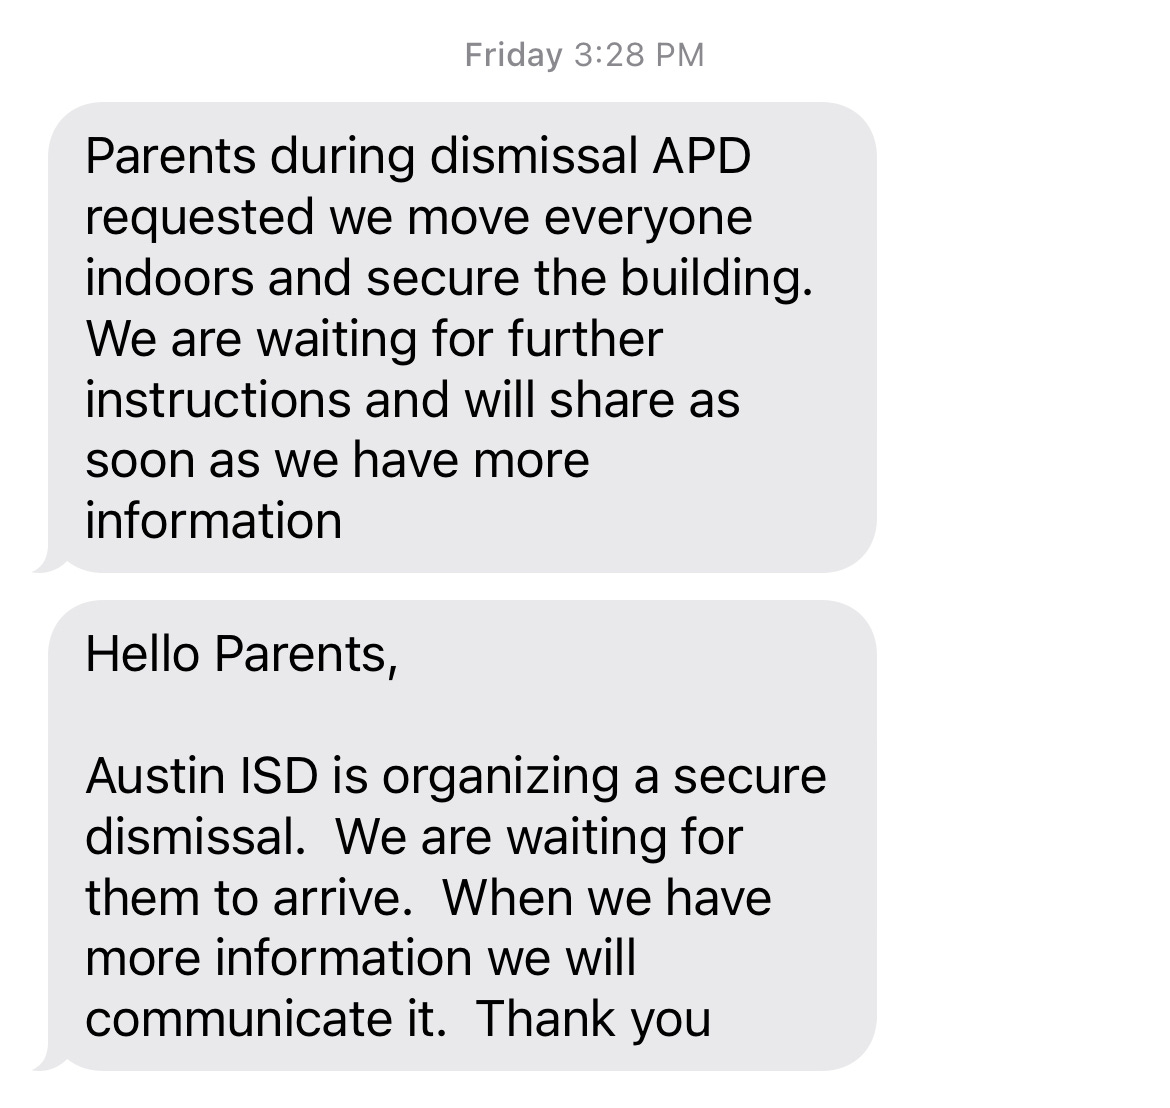 Screen shot of two texts. Above the texts it says "Friday 3:28pm". TEXT ONE: Parents during dismissal APD requested we move everyone indoors and secure the building. We are waiting for further instructions and will share as soon as we have more information. TEXT TWO: Hello Parents, Austin ISD is organizing a secure dismissal. We are waiting for them to arrive. When we have more information we will communicate it. Thank you